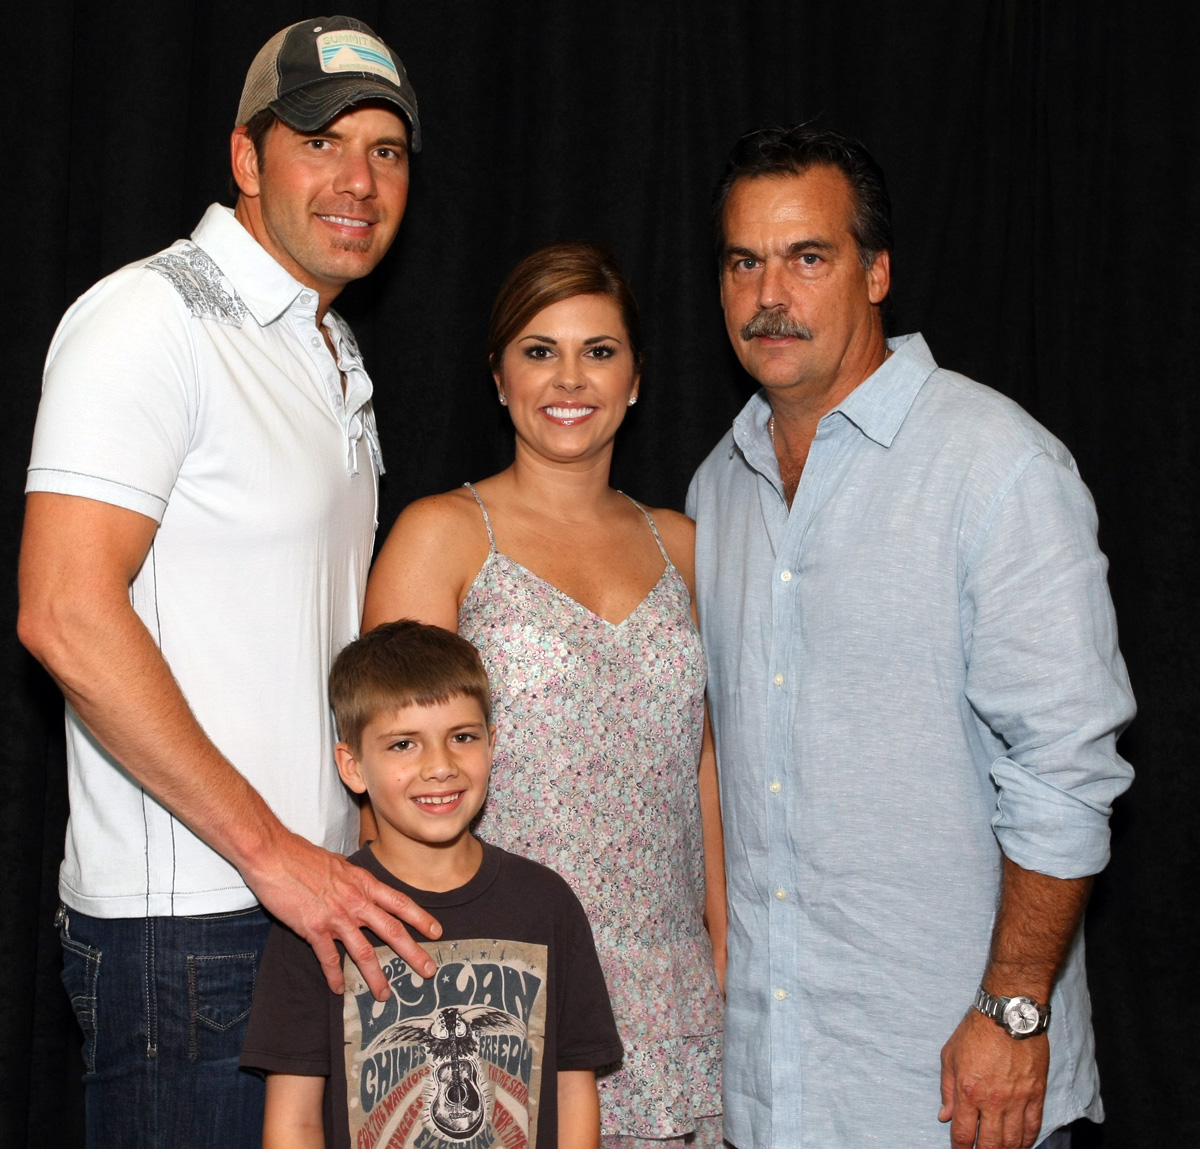 Rodney Atkins meets up with Jeff Fisher